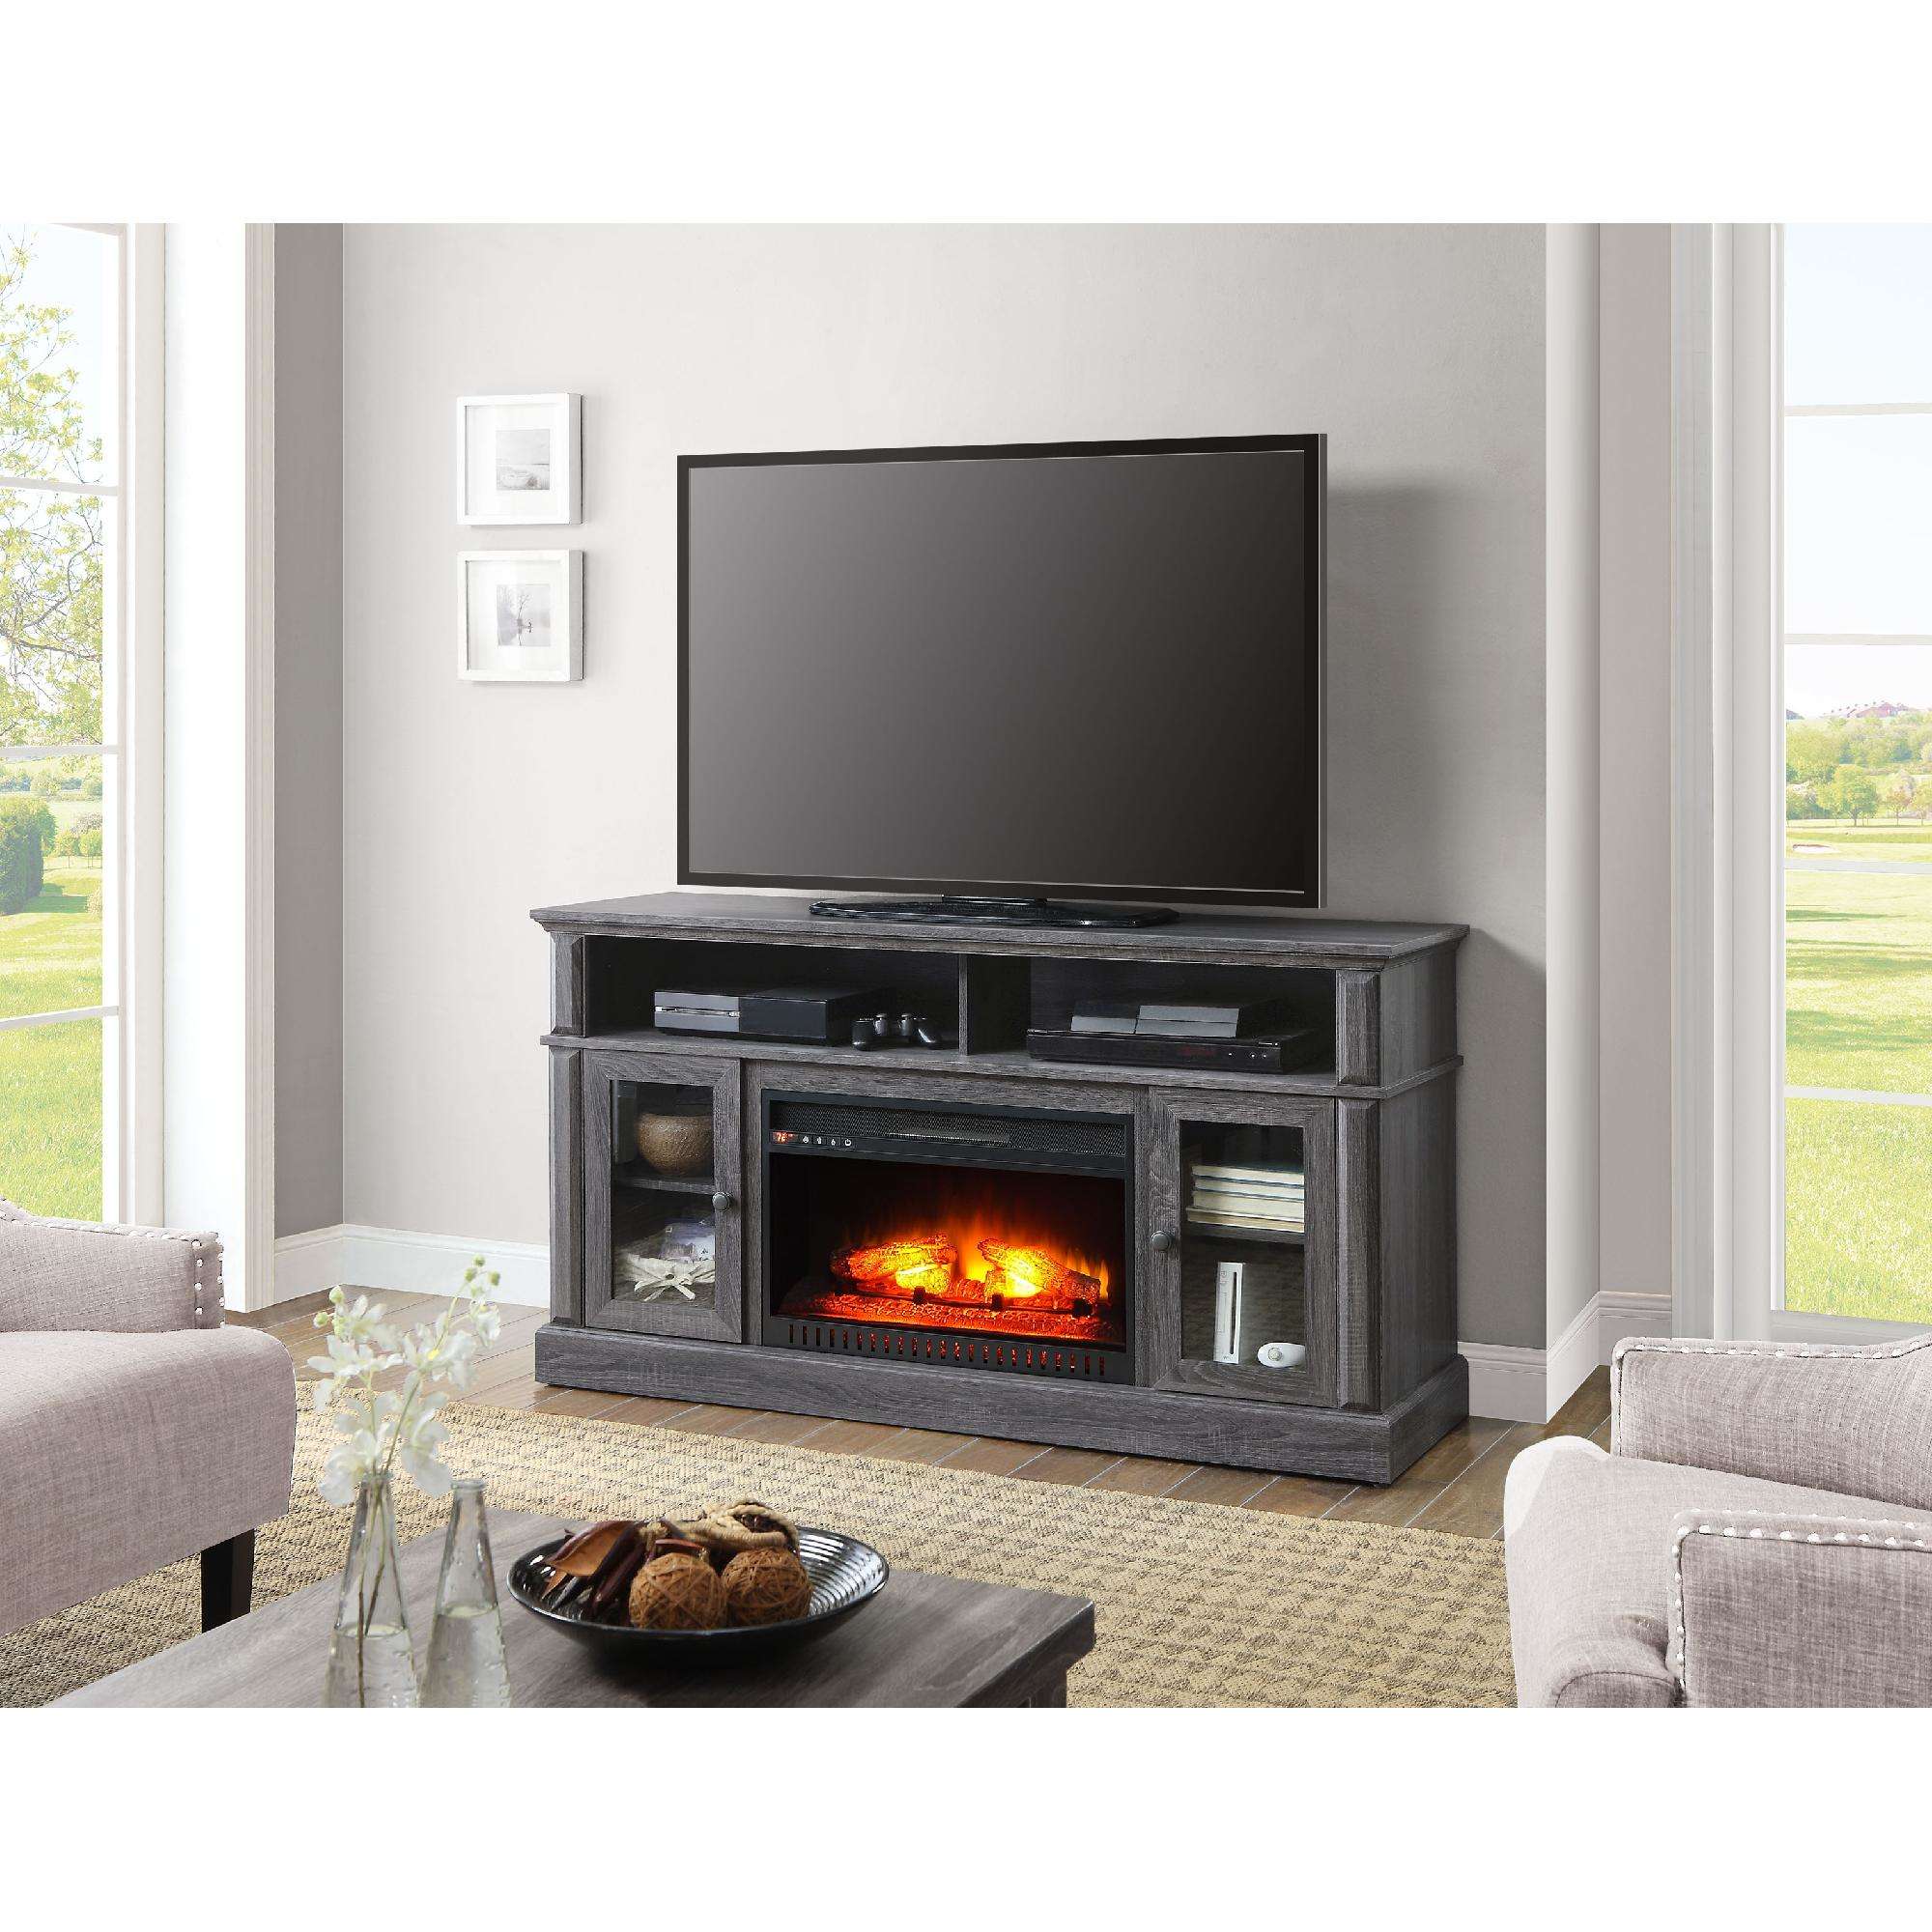 Sams Club Electric Fireplace Best Of Whalen Barston Media Fireplace for Tv S Up to 70 Multiple